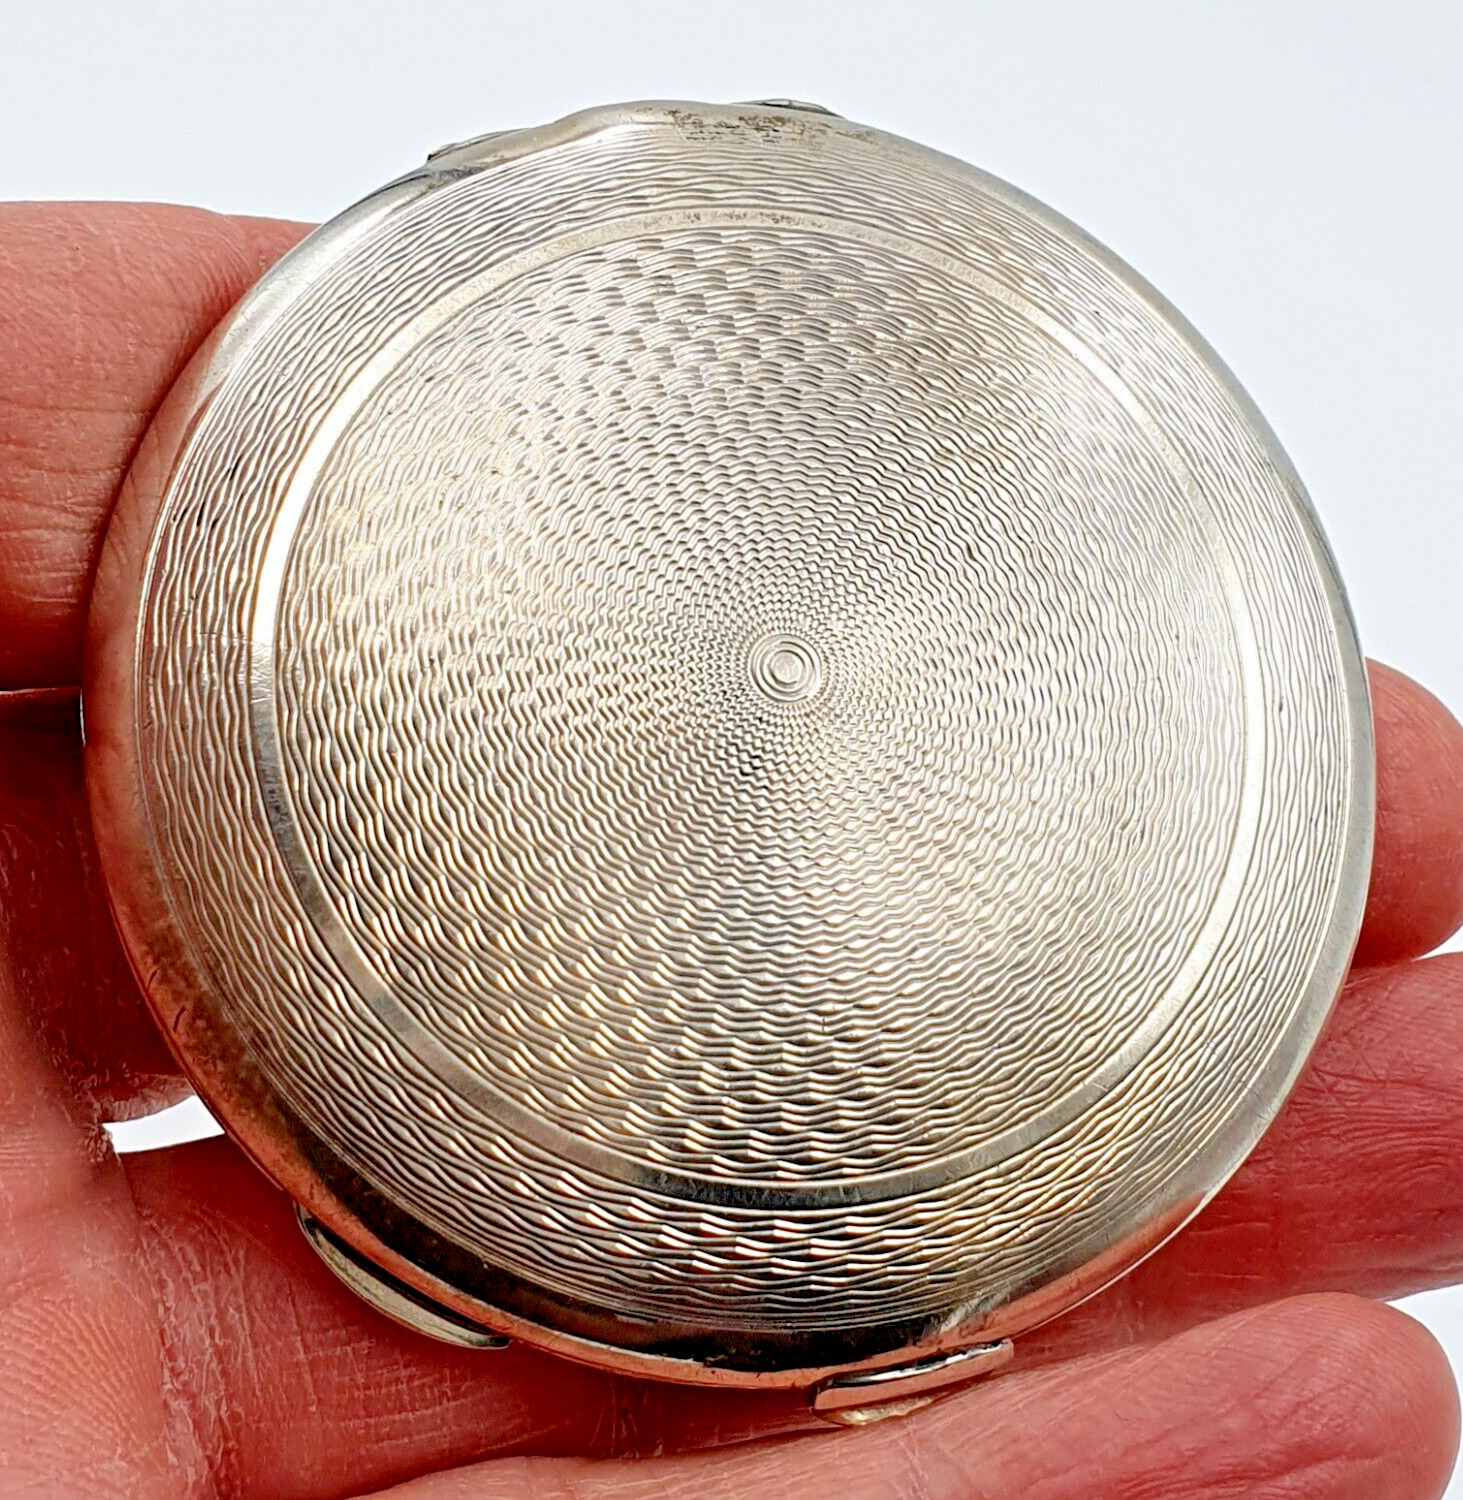 Vintage 1950's sterling silver engine turned ladies mirror compact - Pretty item